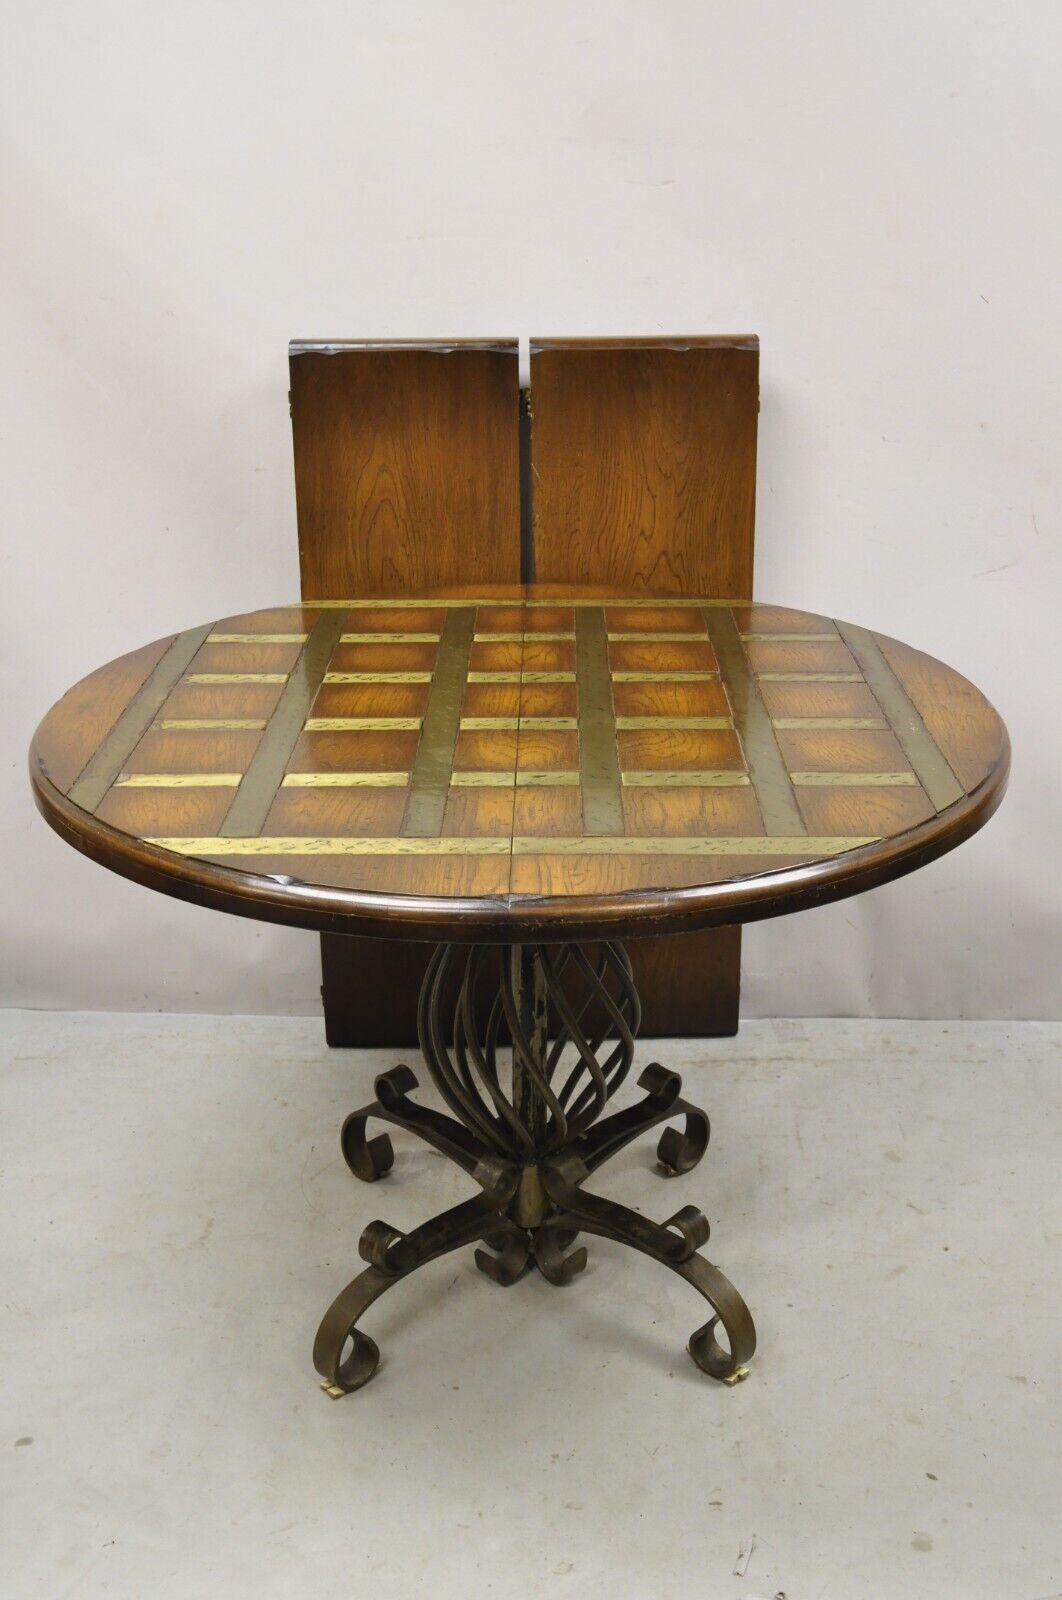 Vintage Spanish rustic twisted iron pedestal metal lattice inlay round dining table 2 leaves. Item features (2) 12